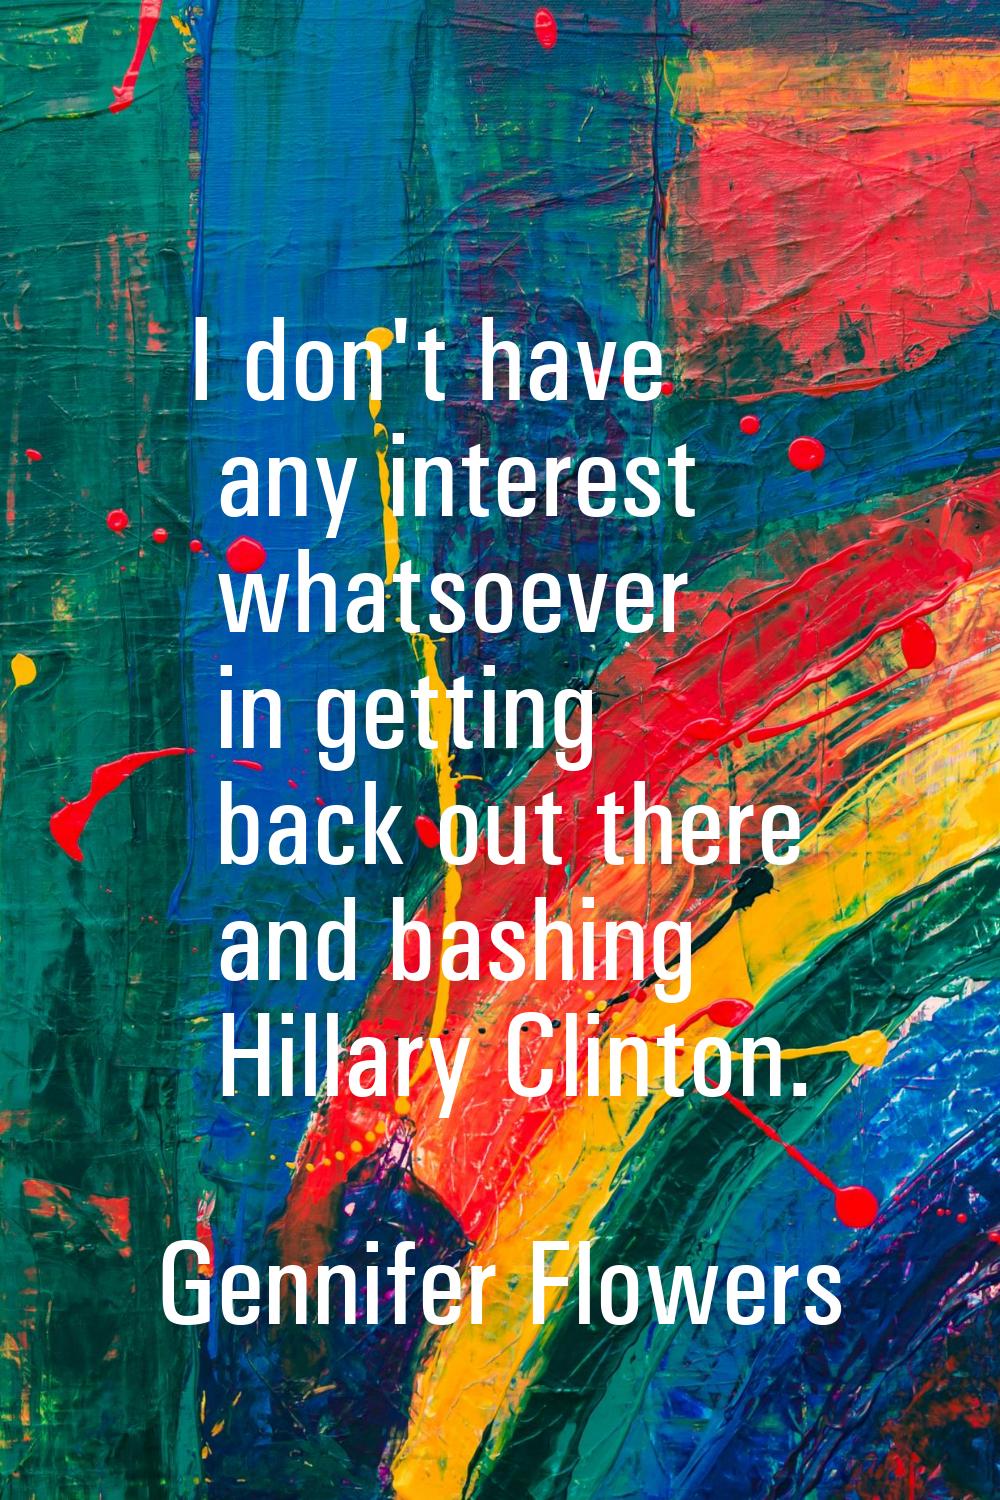 I don't have any interest whatsoever in getting back out there and bashing Hillary Clinton.